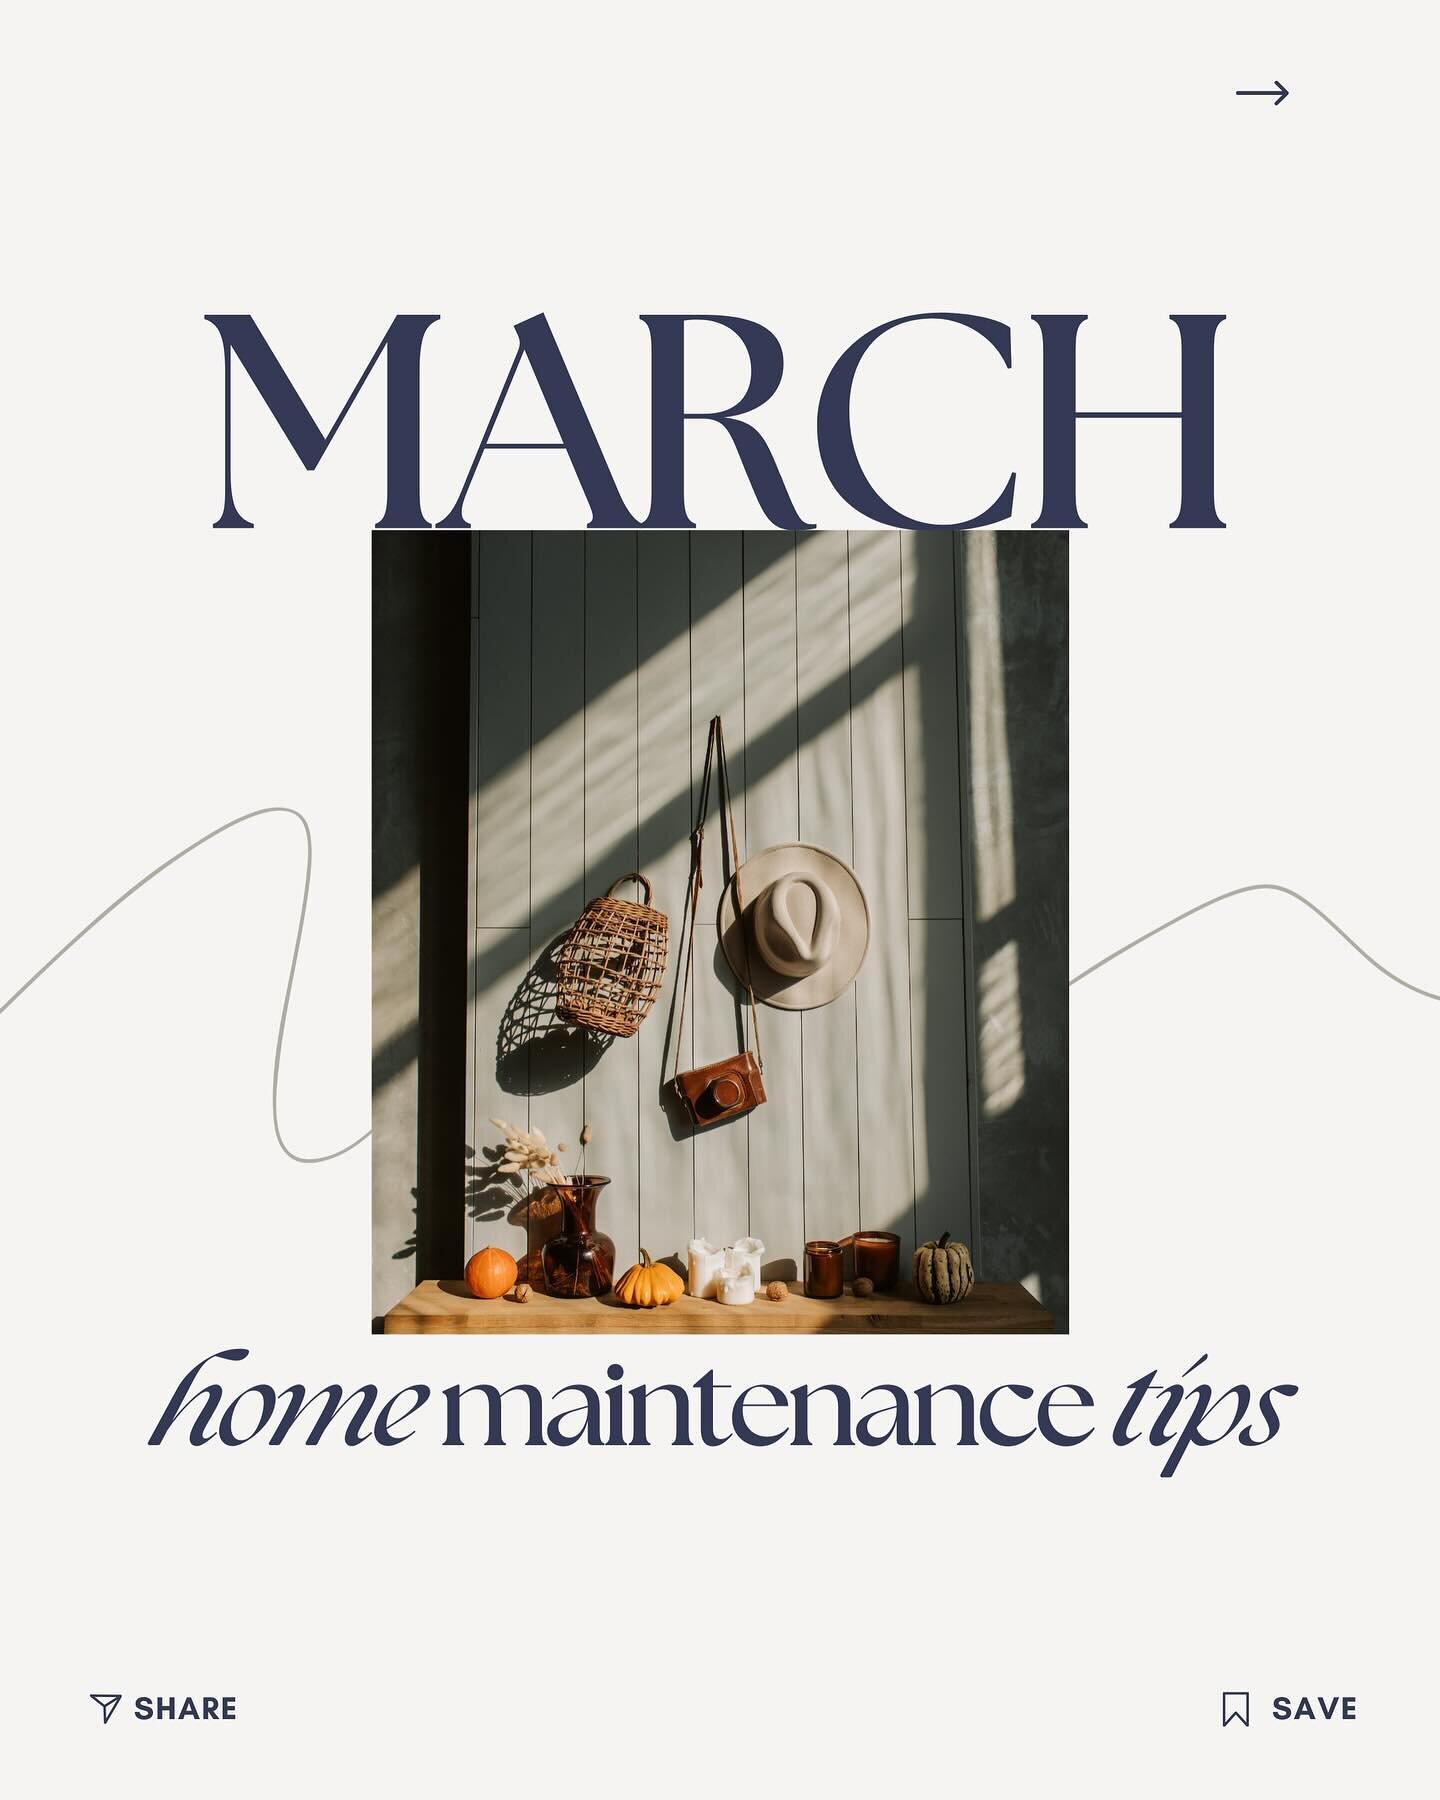 Your March home maintenance tips! 

I always strive to give my clients the information they need when they need it (because there is always a lot going on with life already!) 

If you&rsquo;re curious to read more, check the link in my bio for the fu